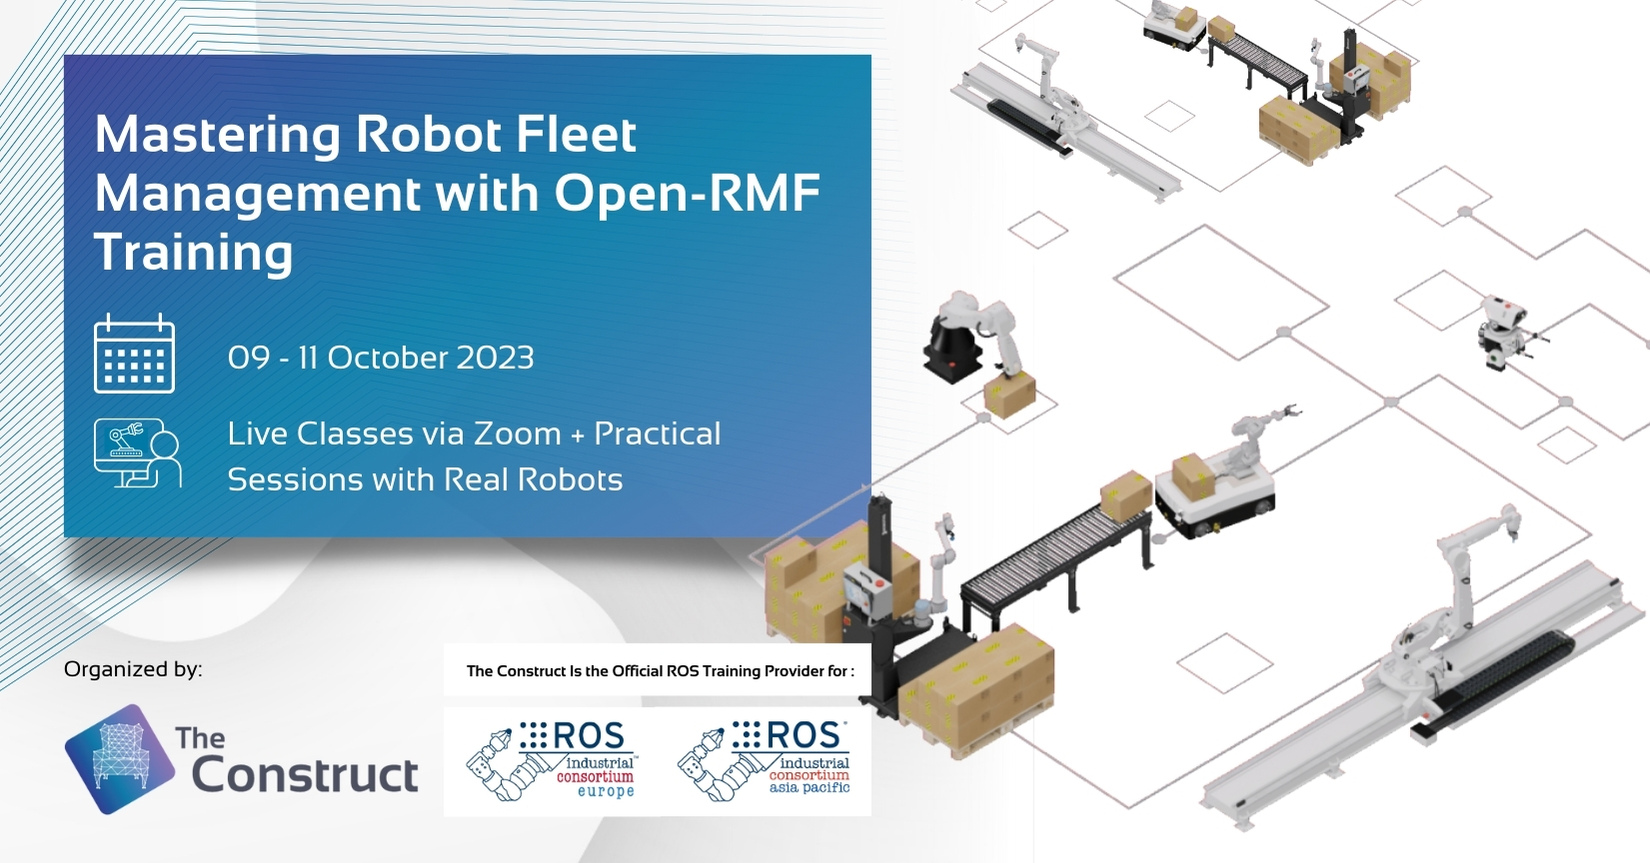 Mastering Robot Fleet Management with Open-RMF Training by The Construct